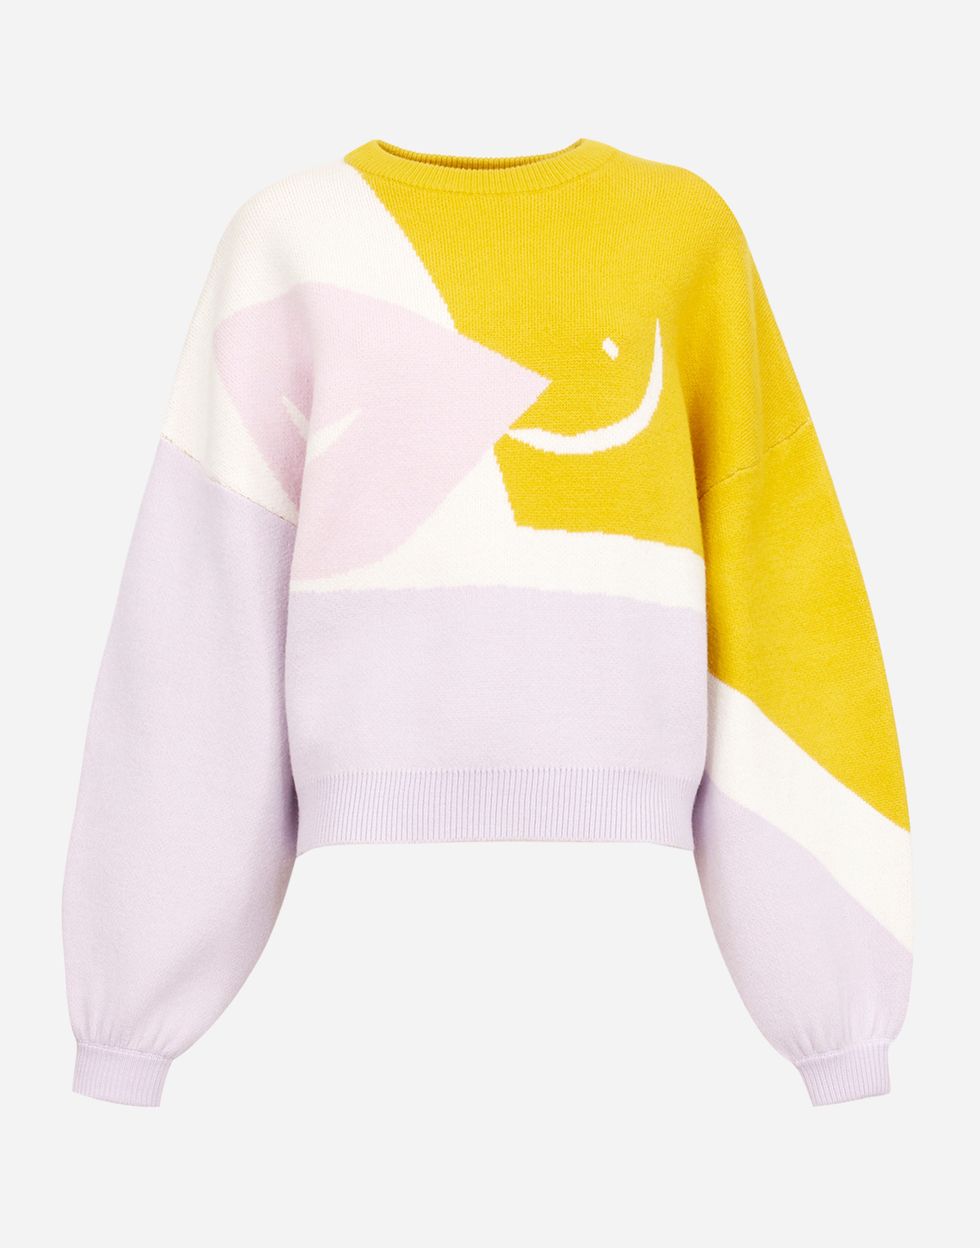 Clothing, White, Yellow, Sleeve, Shoulder, Pink, Sweater, Arm, Outerwear, Neck, 